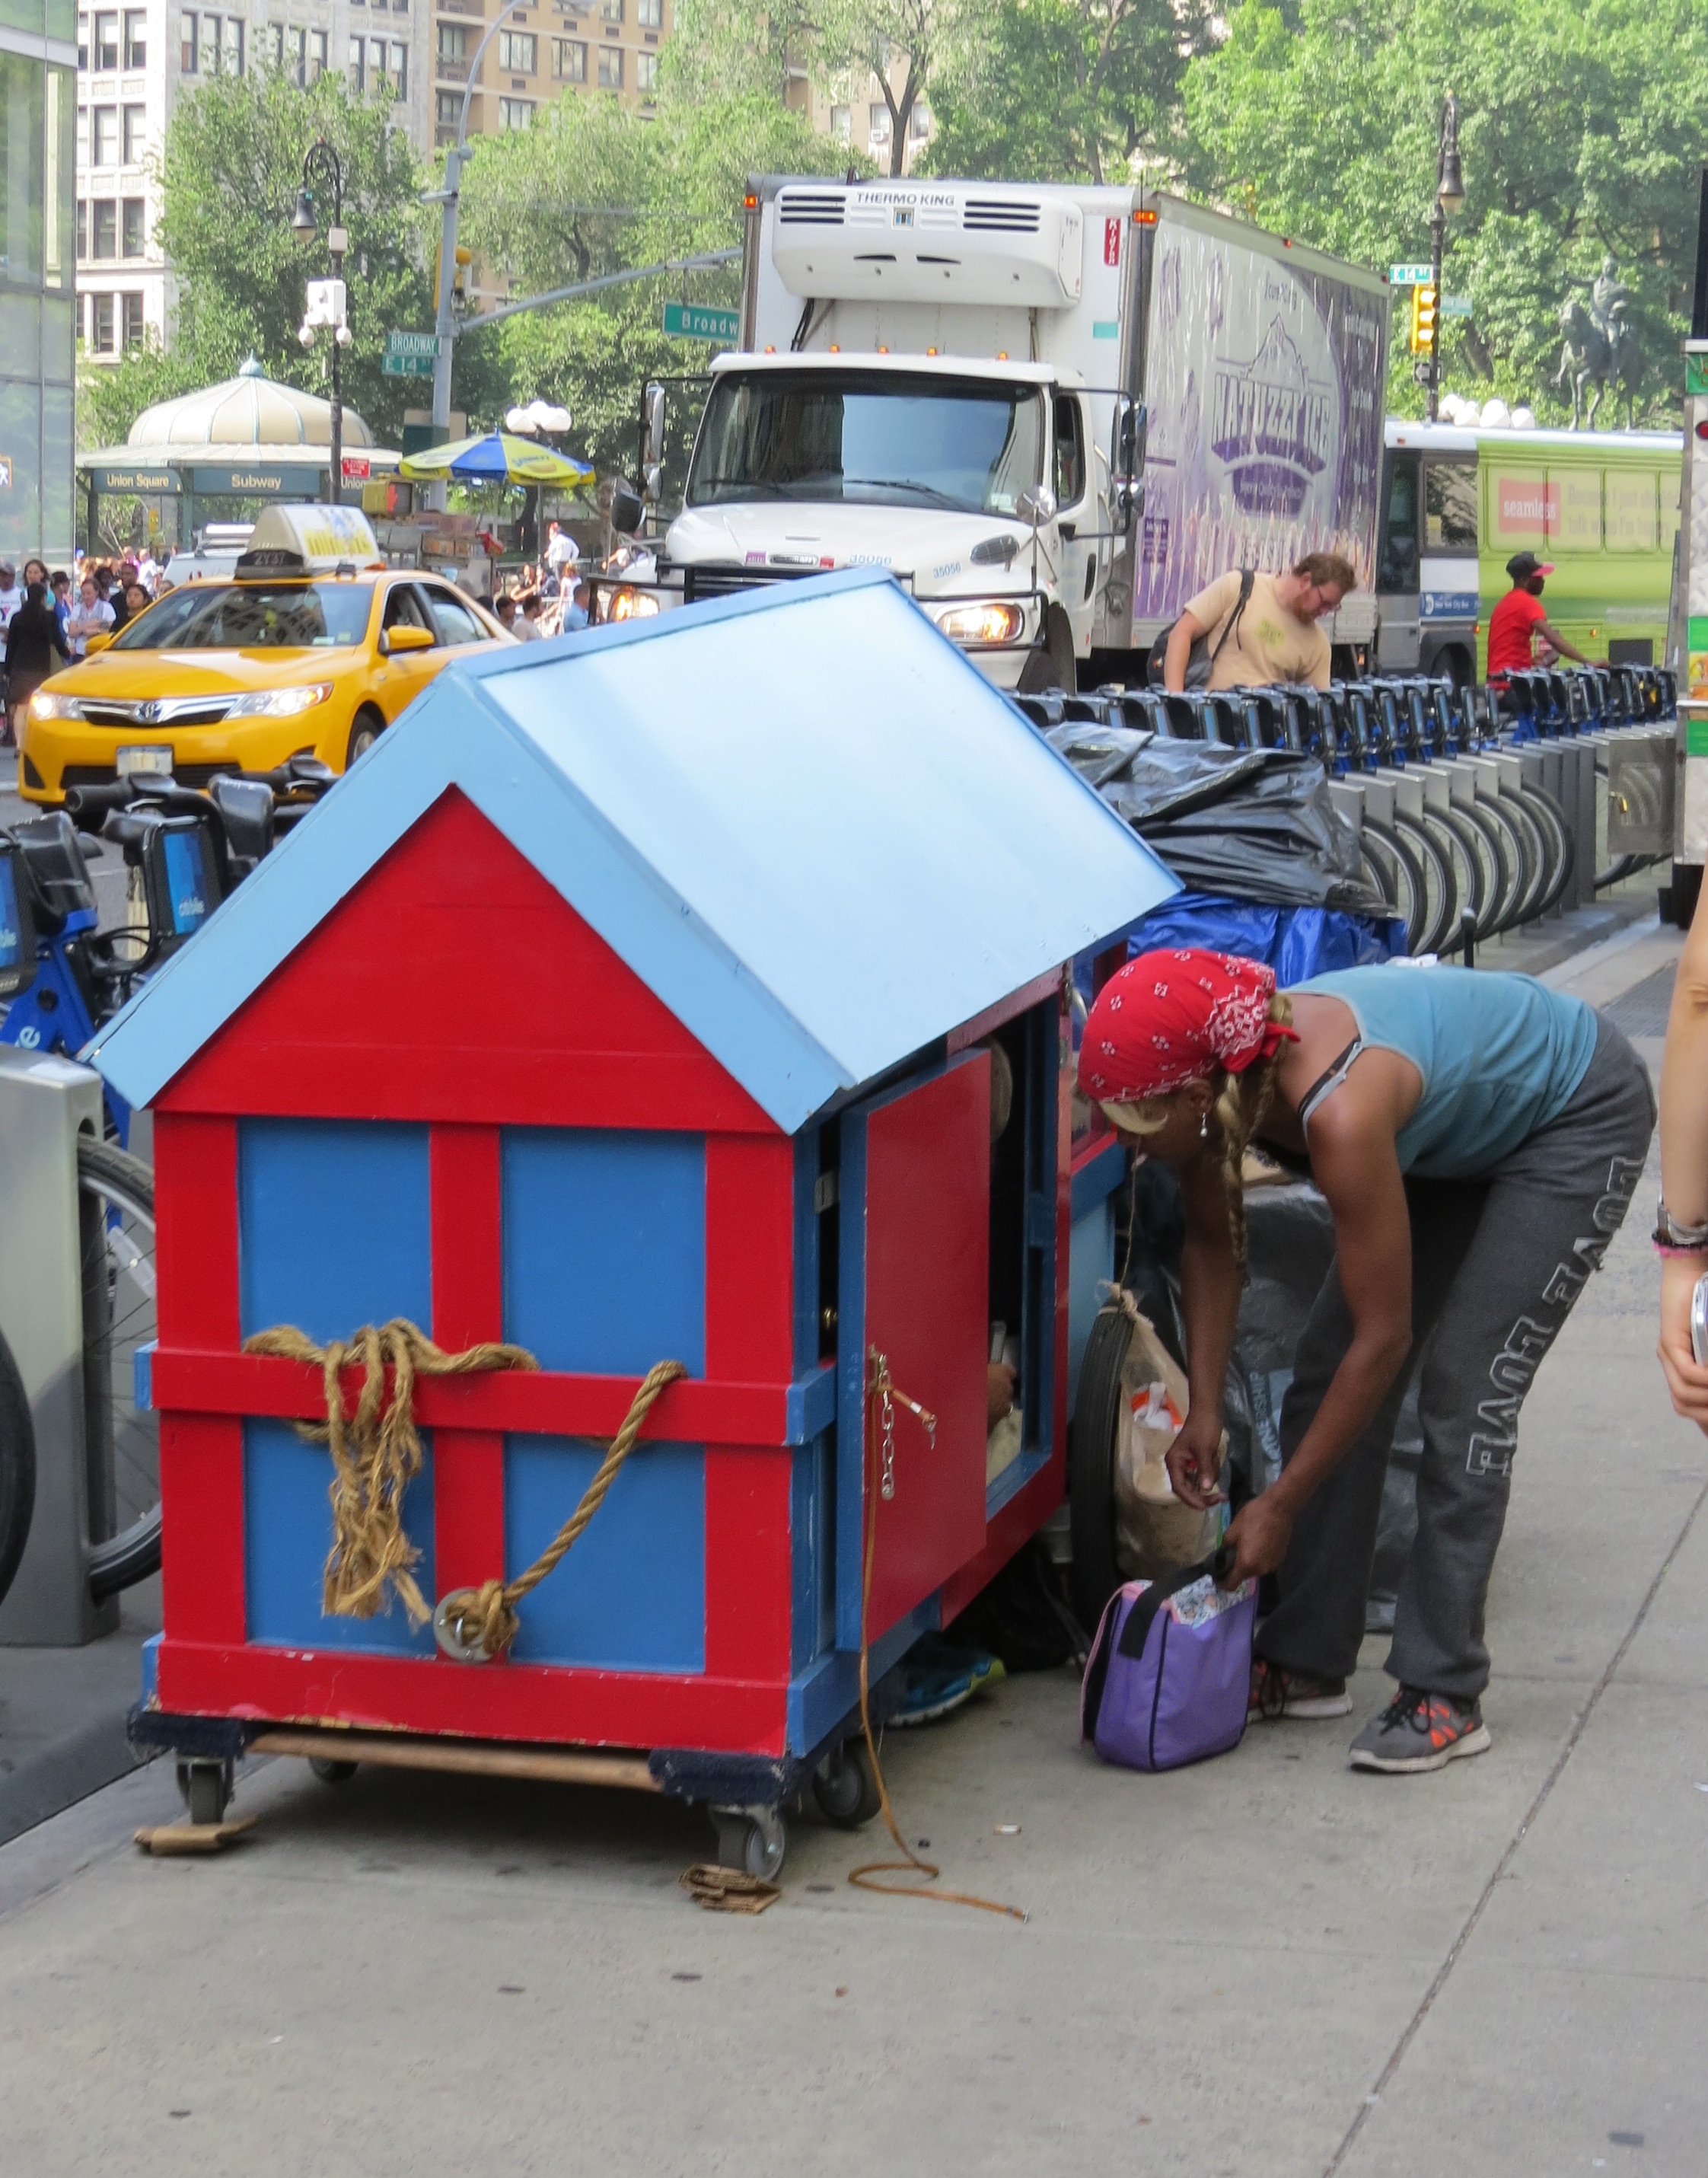 Wagon house being used by "homeless" as shelter in nyc